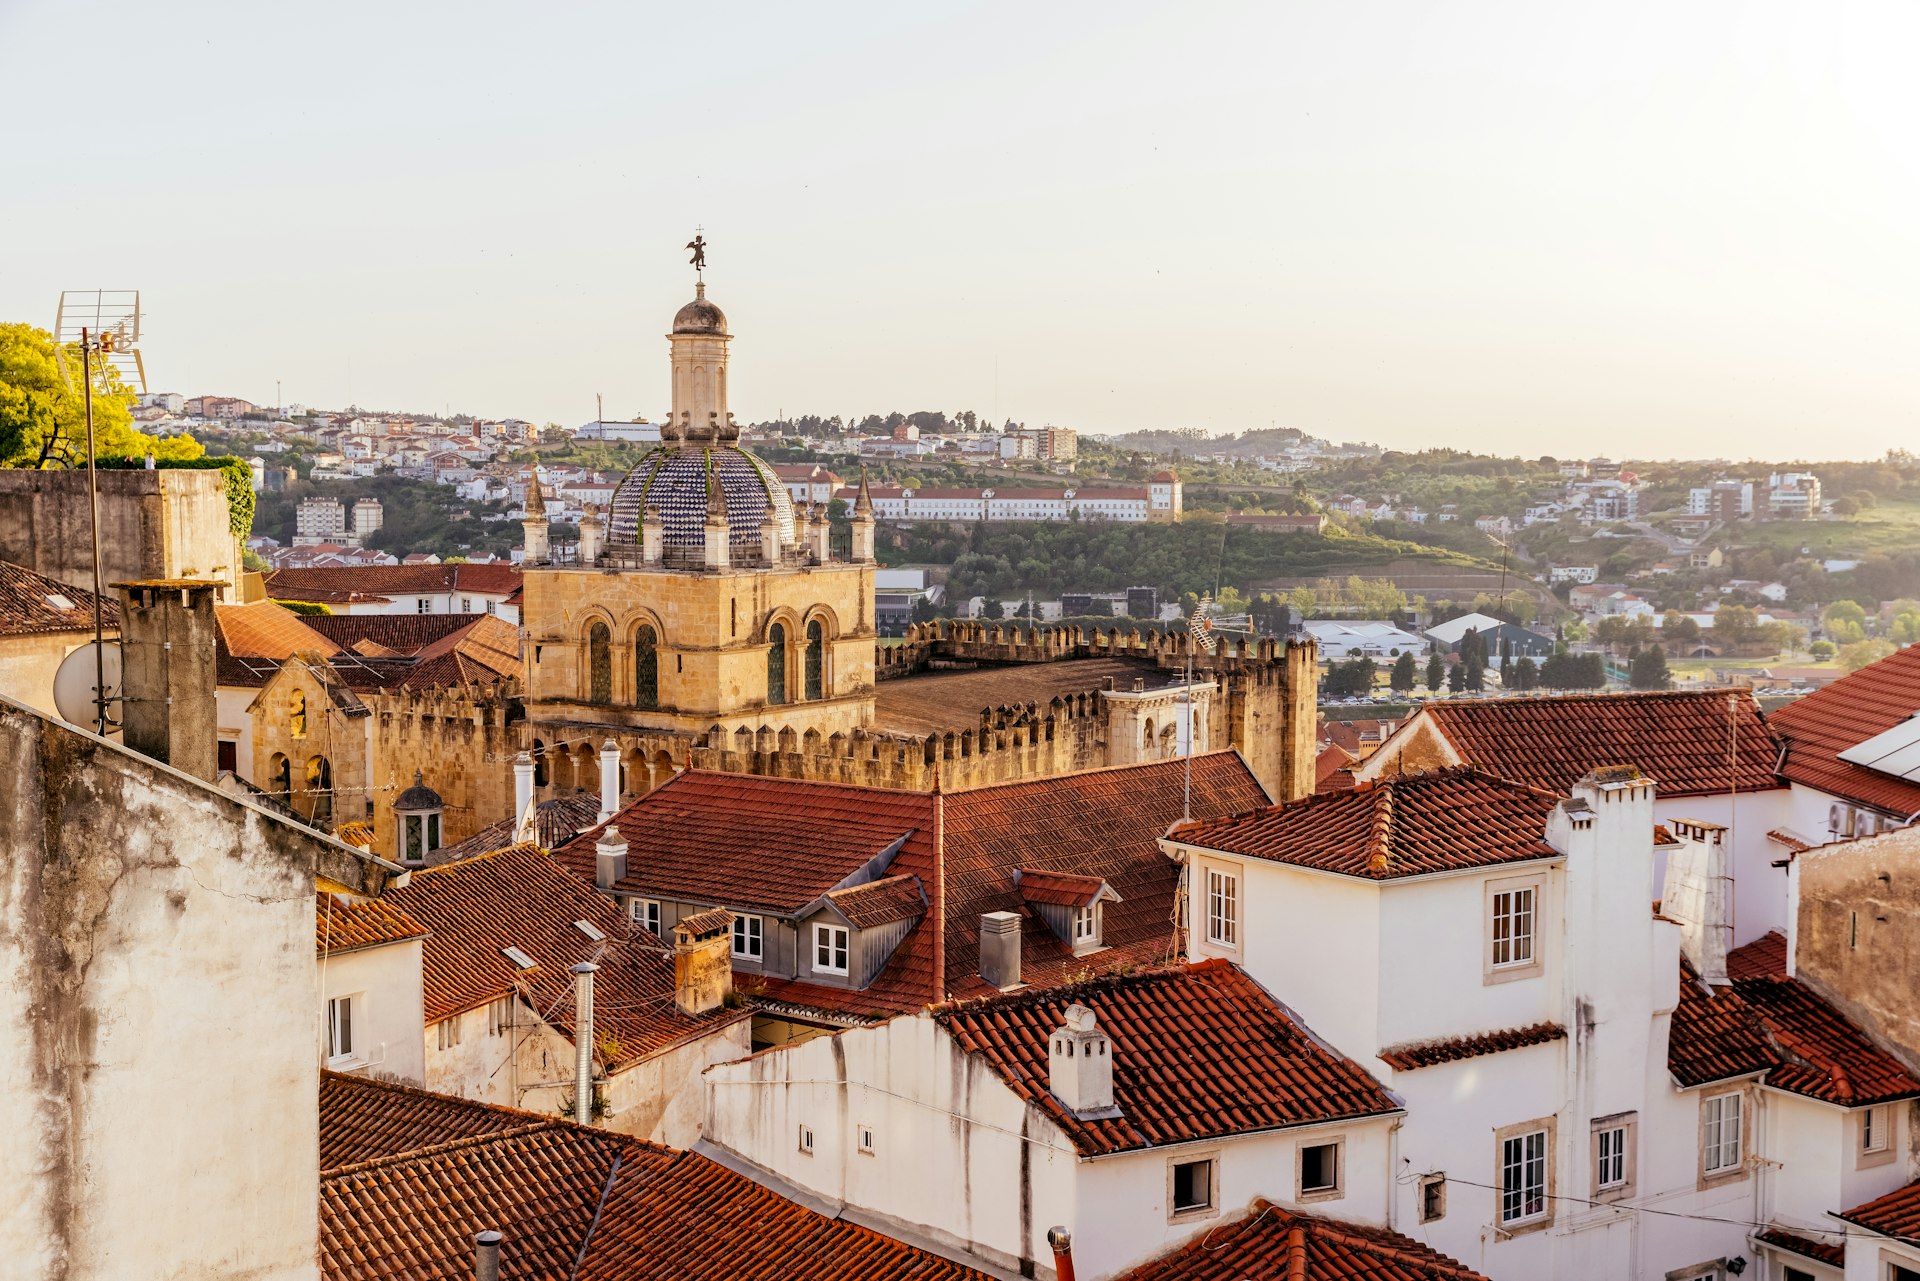 Coimbra city skyline with tower of the Old Cathedral of Coimbra, Portugal